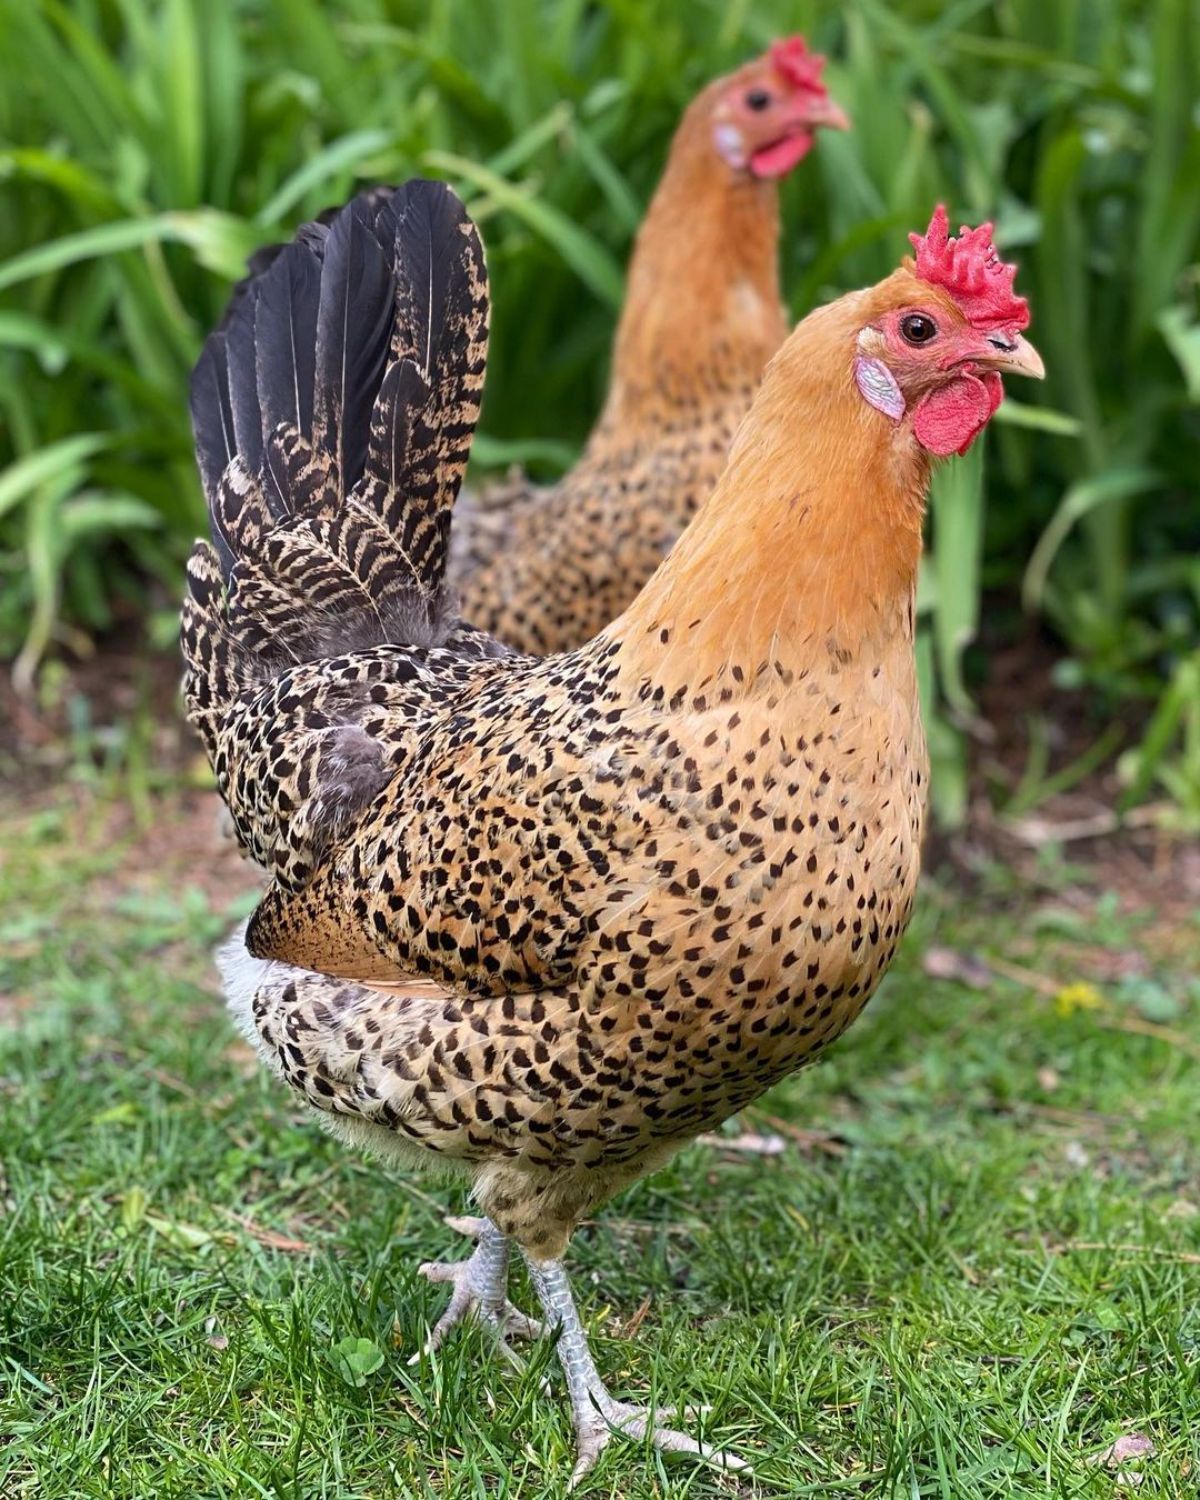 Two adorable Sicilian Buttercup Chickens wandering in a backyard.